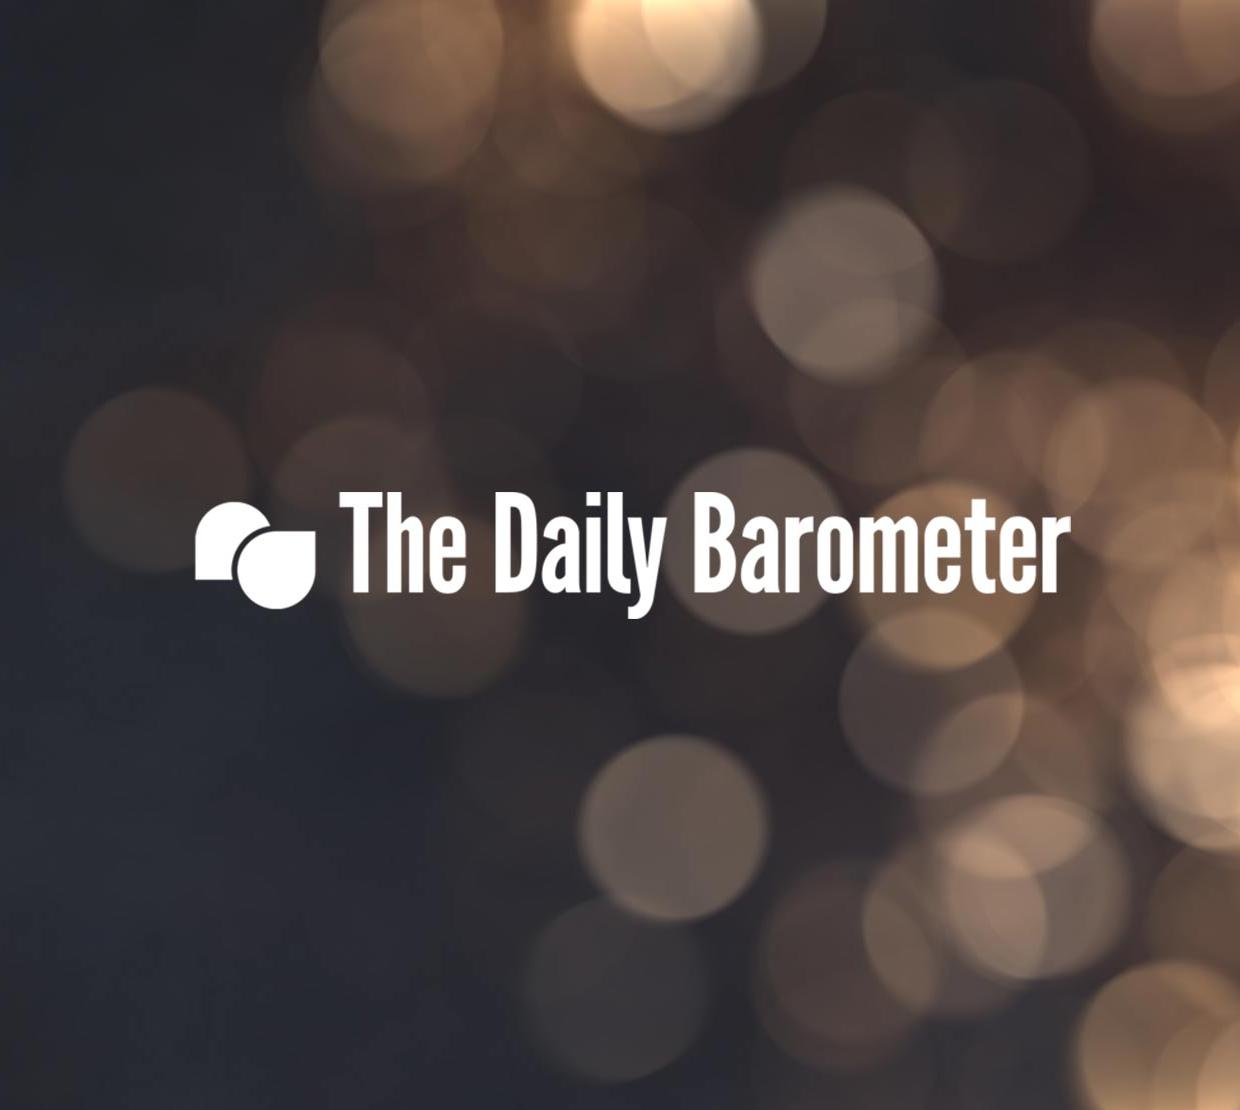 The Barometer logo above brown light texture